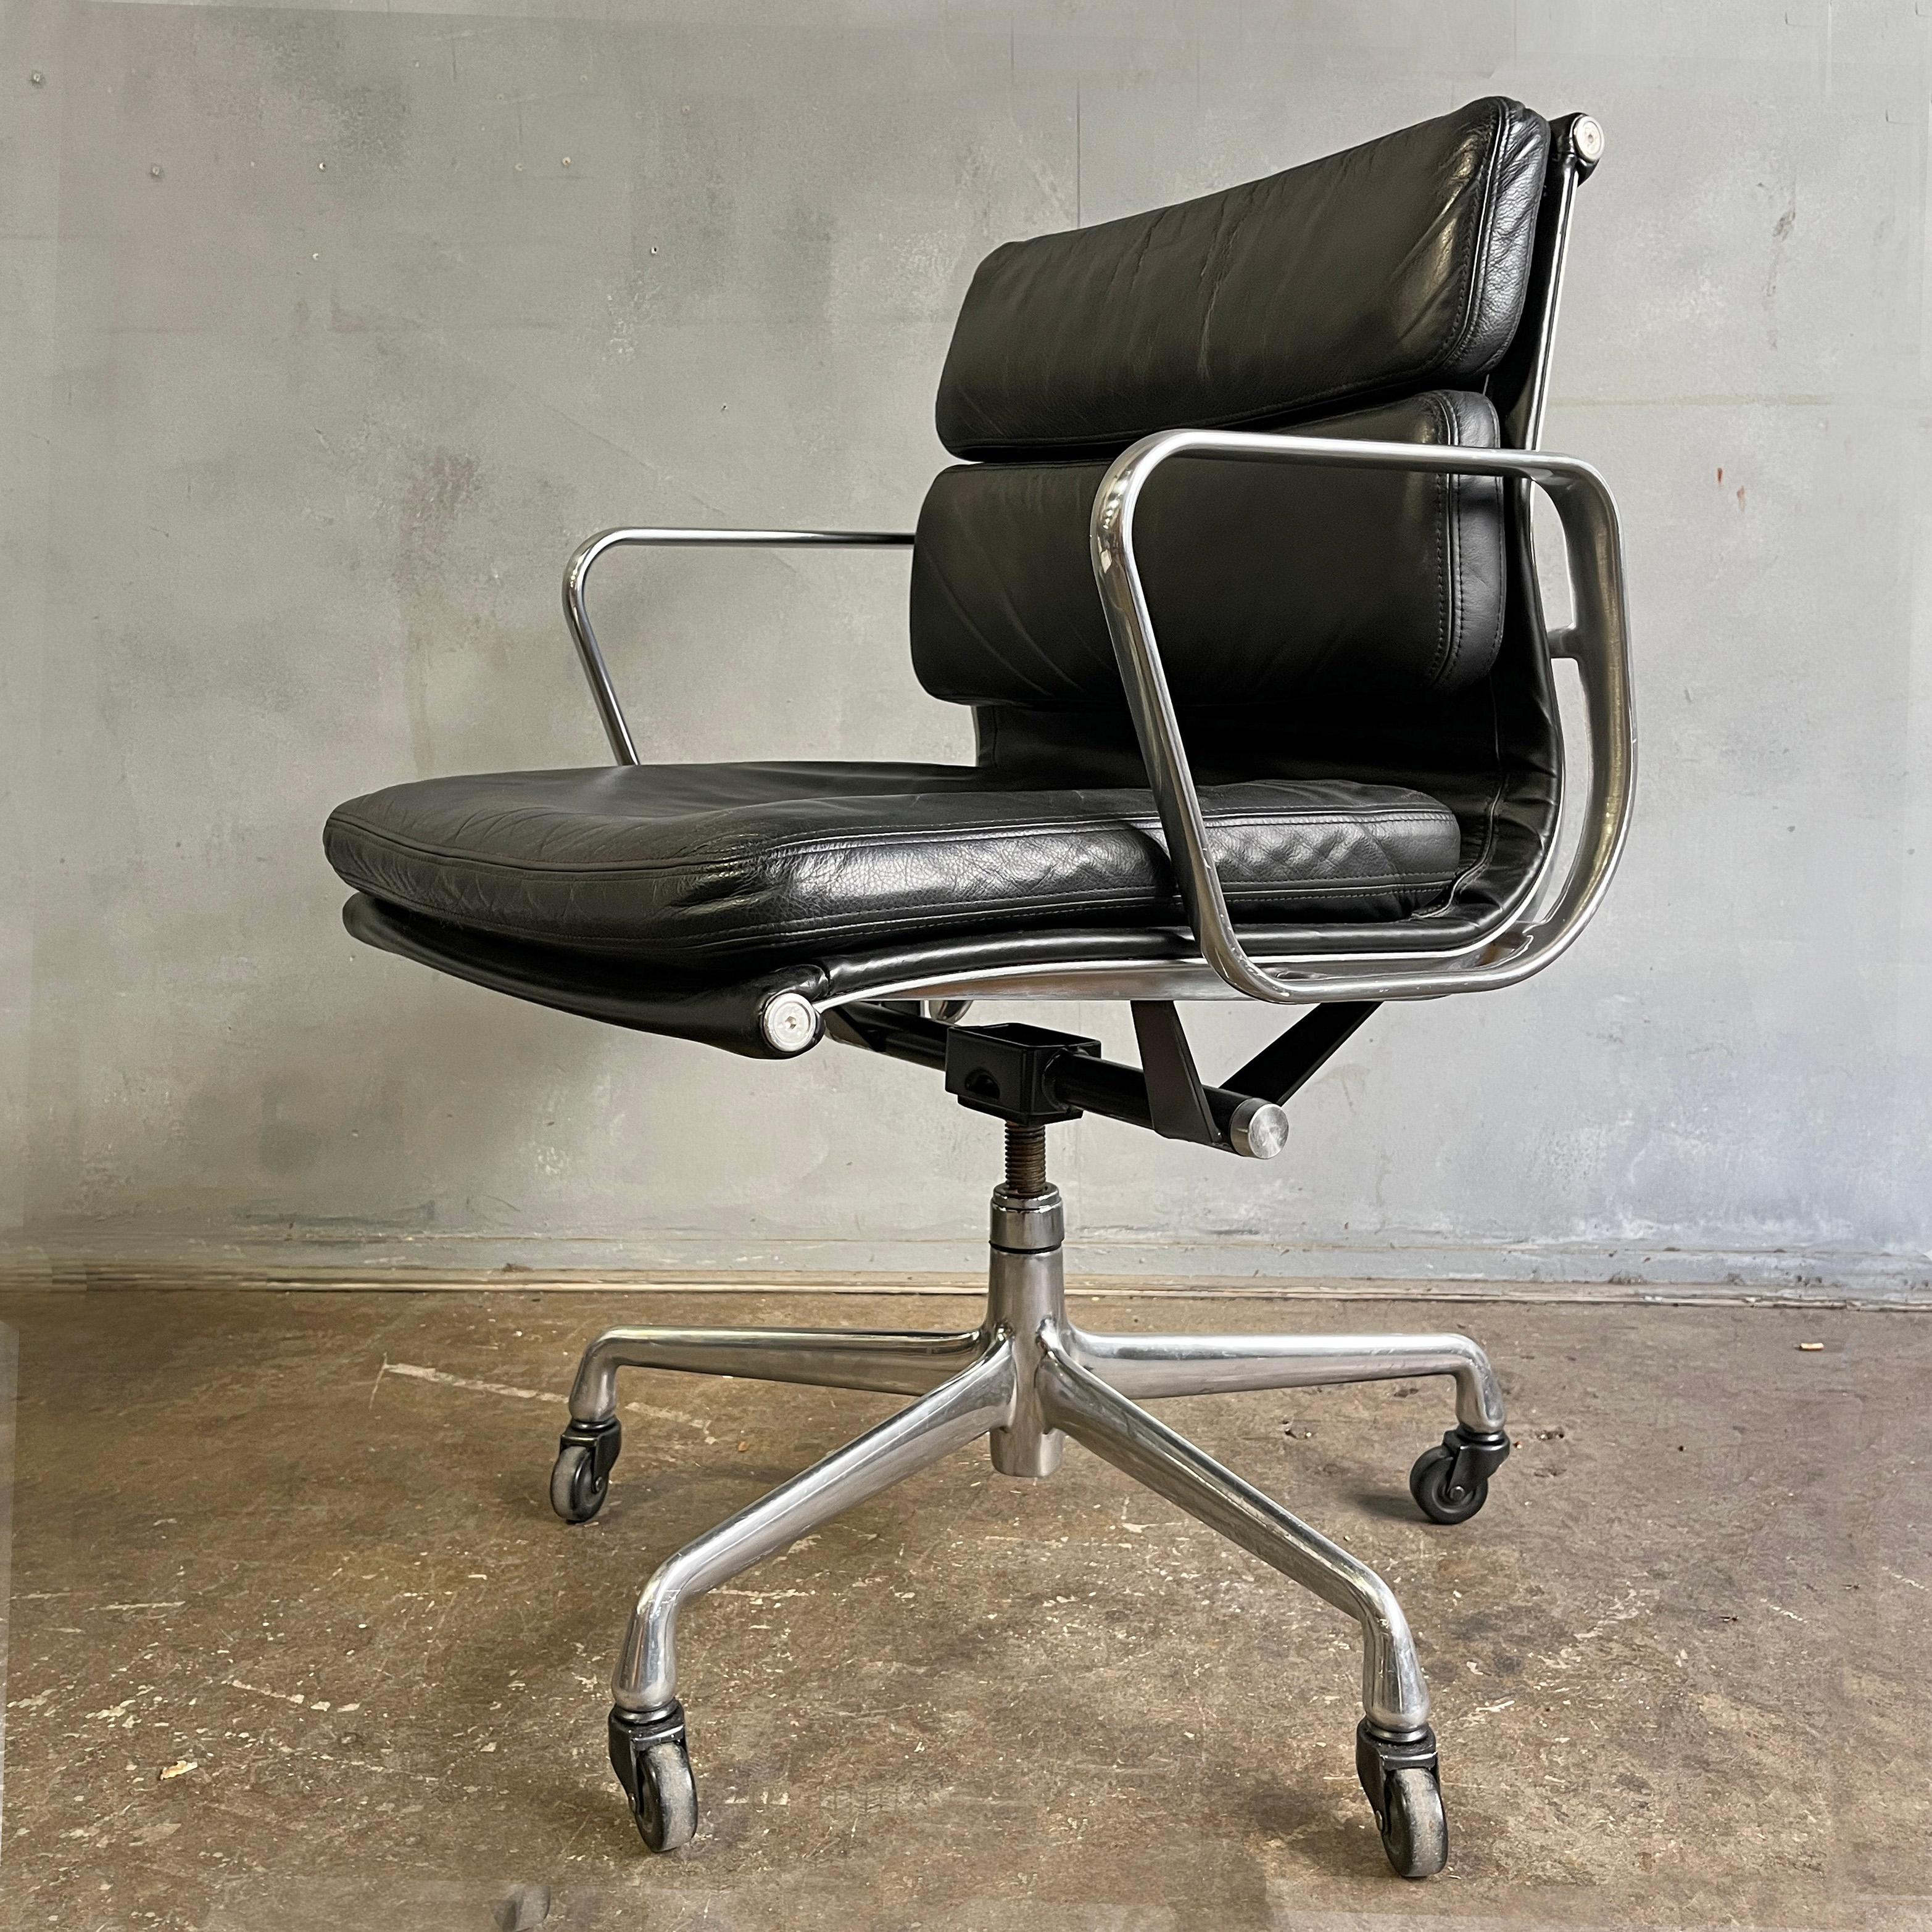 For your consideration is this authentic Eames for Herman Miller vintage soft pad chair in black leather. Adjustable tilt and height with manual lift. This authentic vintage example are icons of Mid-Century Modern design. The chair part of the Eames